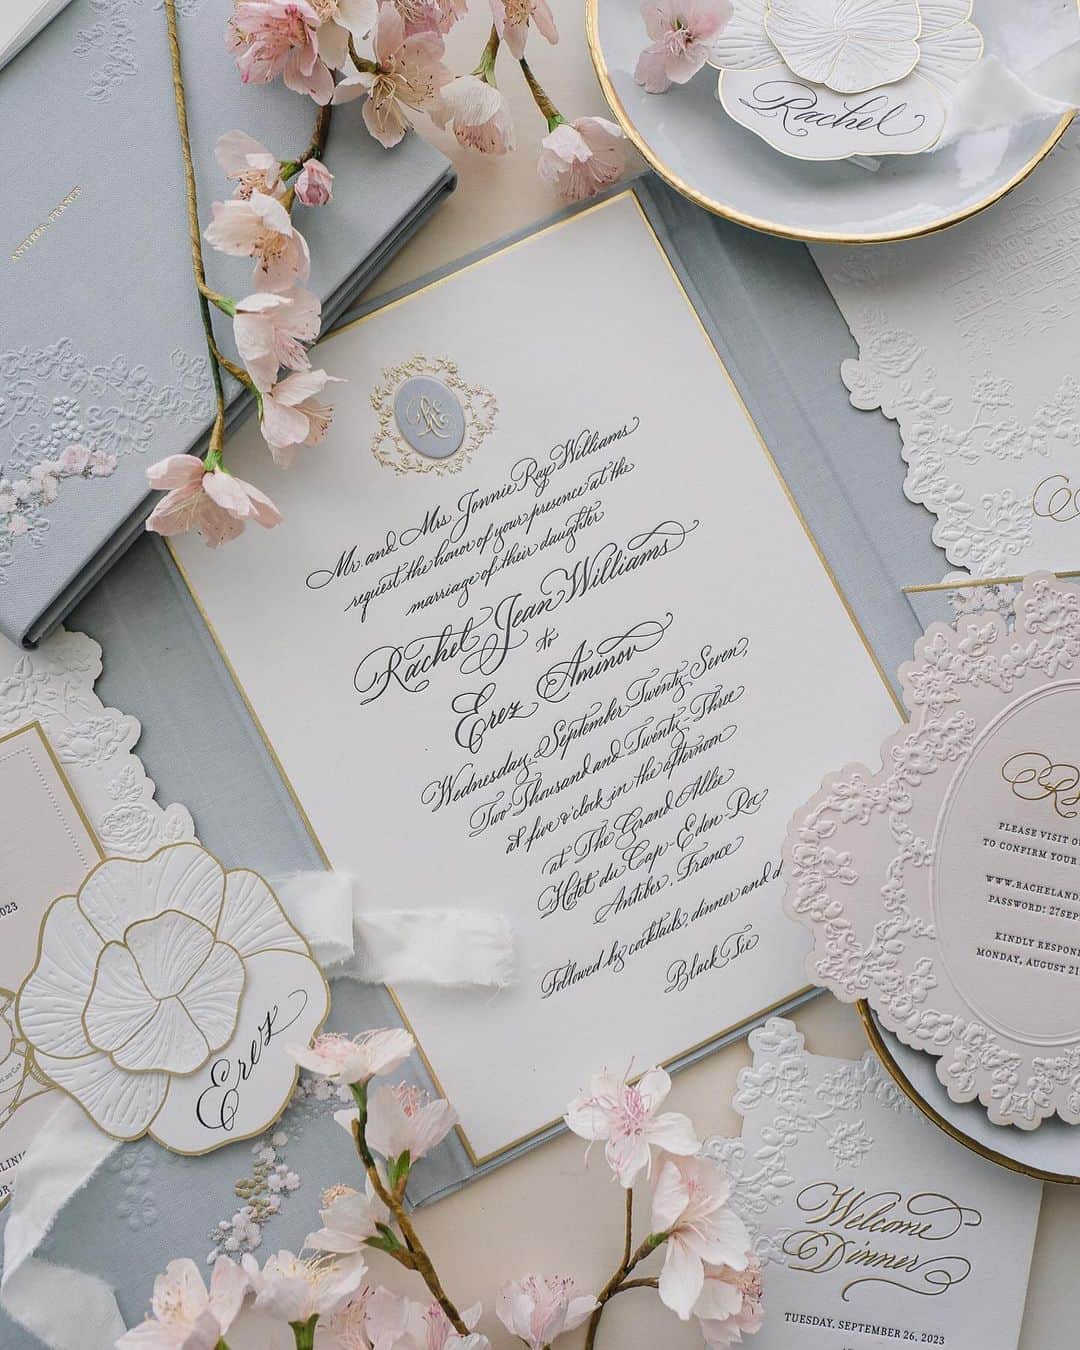 Veronica Halimのインスタグラム：「Capturing the essence of elegance and timeless beauty, Rachel & Erez’s wedding was nothing short of perfection. We had the privilege of designing their wedding invitations and stationery for their enchanting three-day celebration at the Hôtel du Cap-Eden-Roc. ⠀⠀⠀⠀⠀⠀⠀⠀⠀ Our inspiration for the color palette came from the enchanting seaside Riviera, reflected in the soft shades of blue. Additionally, the delicate blush pink hues were drawn from one of Rachel’s five exquisite Chanel Haute Couture dresses ⠀⠀⠀⠀⠀⠀⠀⠀⠀ Thank you for letting us be a part of your special day by creating all the gorgeous paper items. It was a blast!  📷Slide 2,4,7,10 @davidbastianoni    Wedding Planning, Event & Design Concepts @sarahhaywoodweddings  Videography @marcocaputofilms  Florals @roni_floral_design  Clutch @_thebellarosacollection   Bride @princessrachelwilliams Haute Couture Gown @chanelofficial @olivia_douchez   #ldvh #weddinginvitation #bespokestationery #weddinginspiration #カリグラフィー　#ウェディング　#ウェディングアイテム #weddinginspiration #weddingdesigner #papers #truffypi #hotelducapedenroc #weddingtrend #veronicahalim #weddingpapers #ChanelHauteCouture #chanelbride」